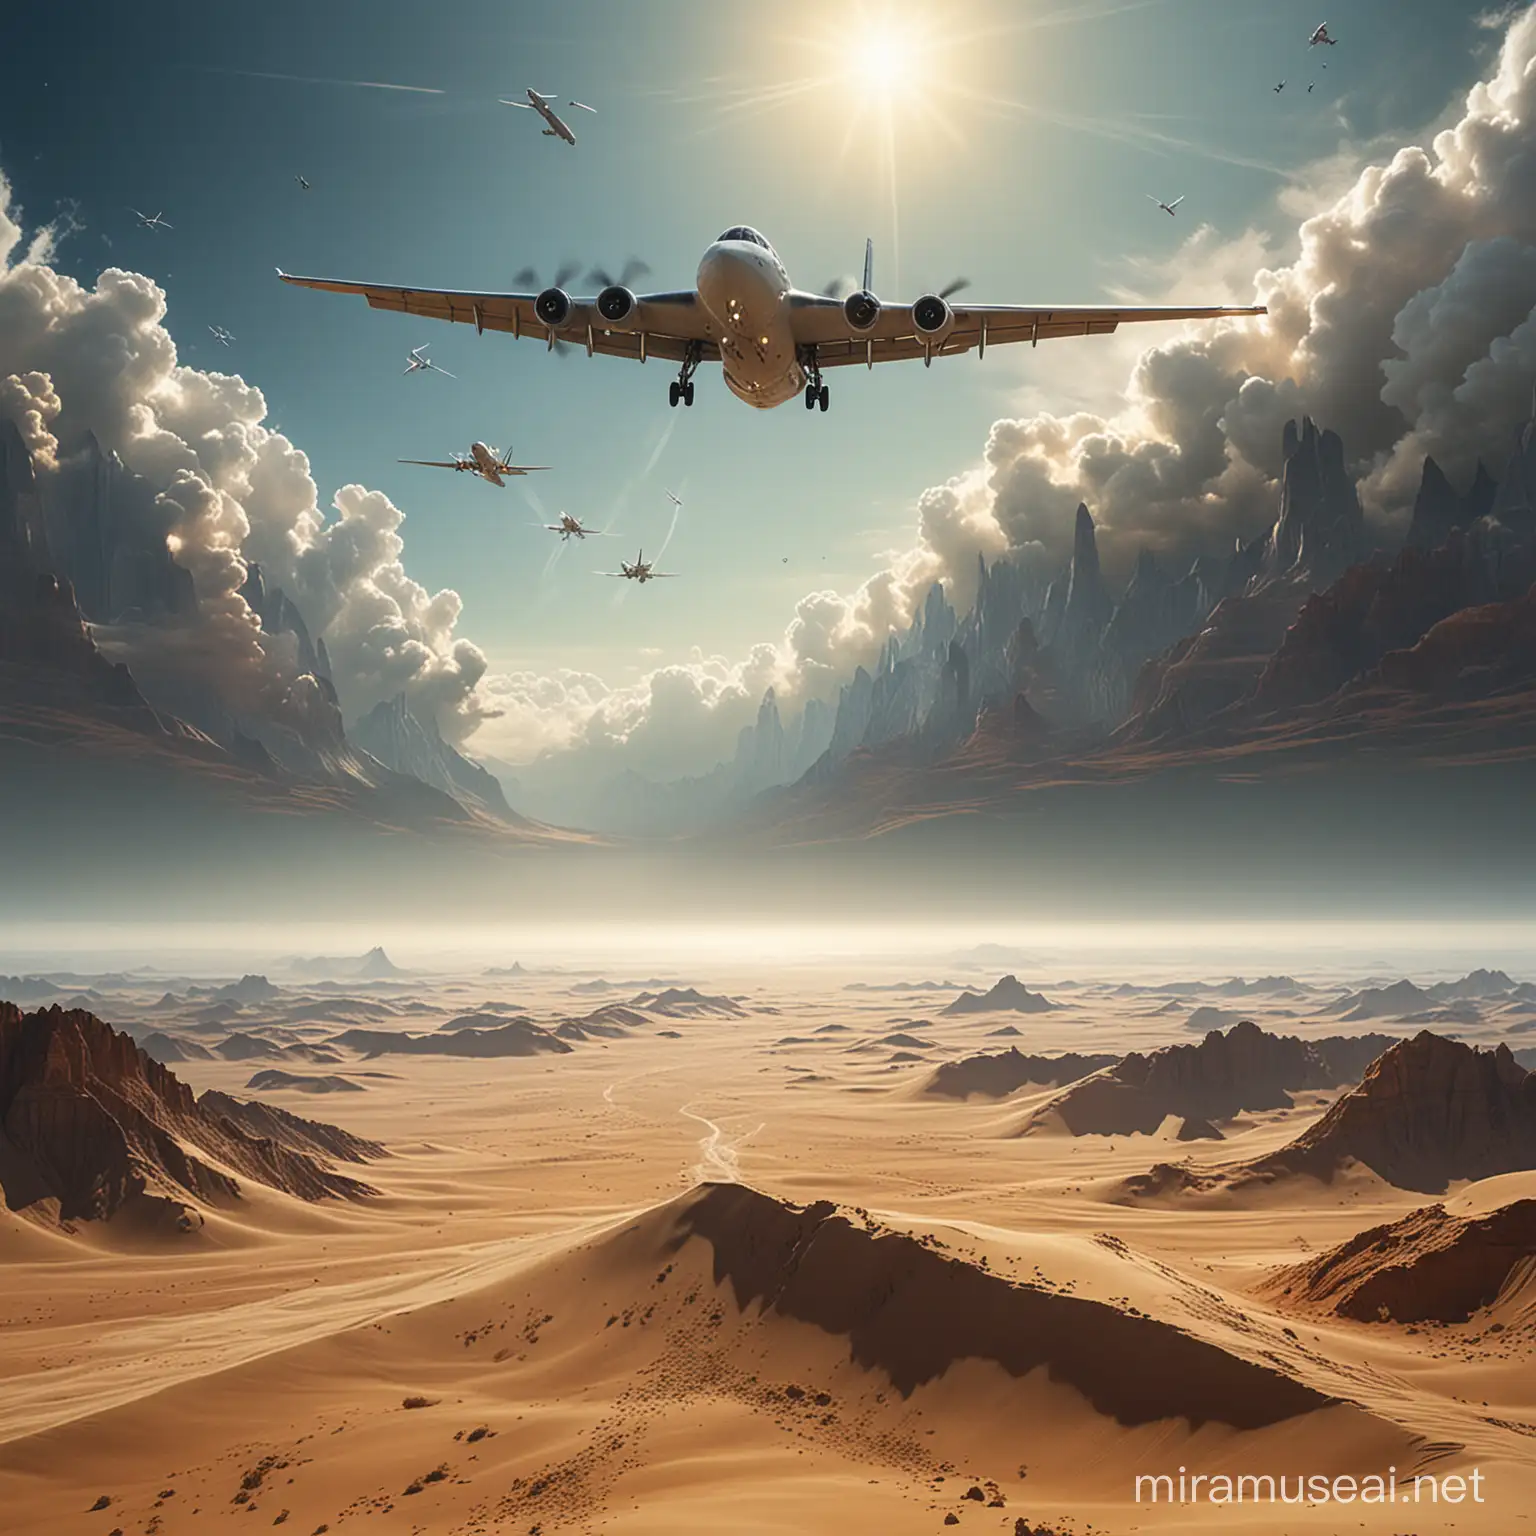 Majestic Earthscape Surreal Transformation and Harmonious Flight